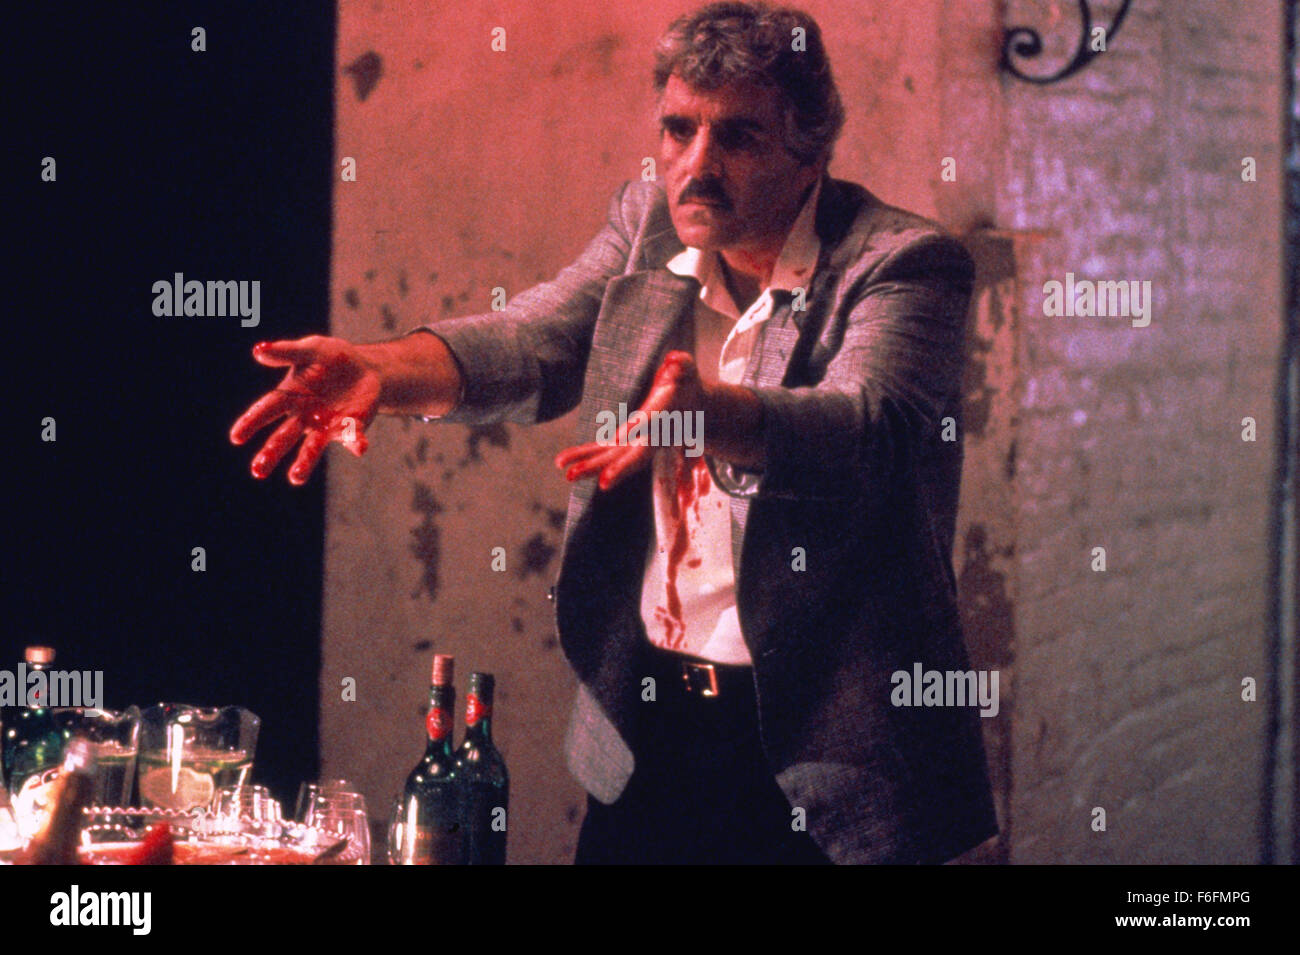 RELEASE DATE: 18 January 1991. MOVIE TITLE: Men of Respect - STUDIO: Grandview Avenue Pictures. PLOT: A hitman heeds a spiritualist's prophesies that he will rise to the head of his family. PICTURED: DENNIS FARINA as Bankie Como. Stock Photo